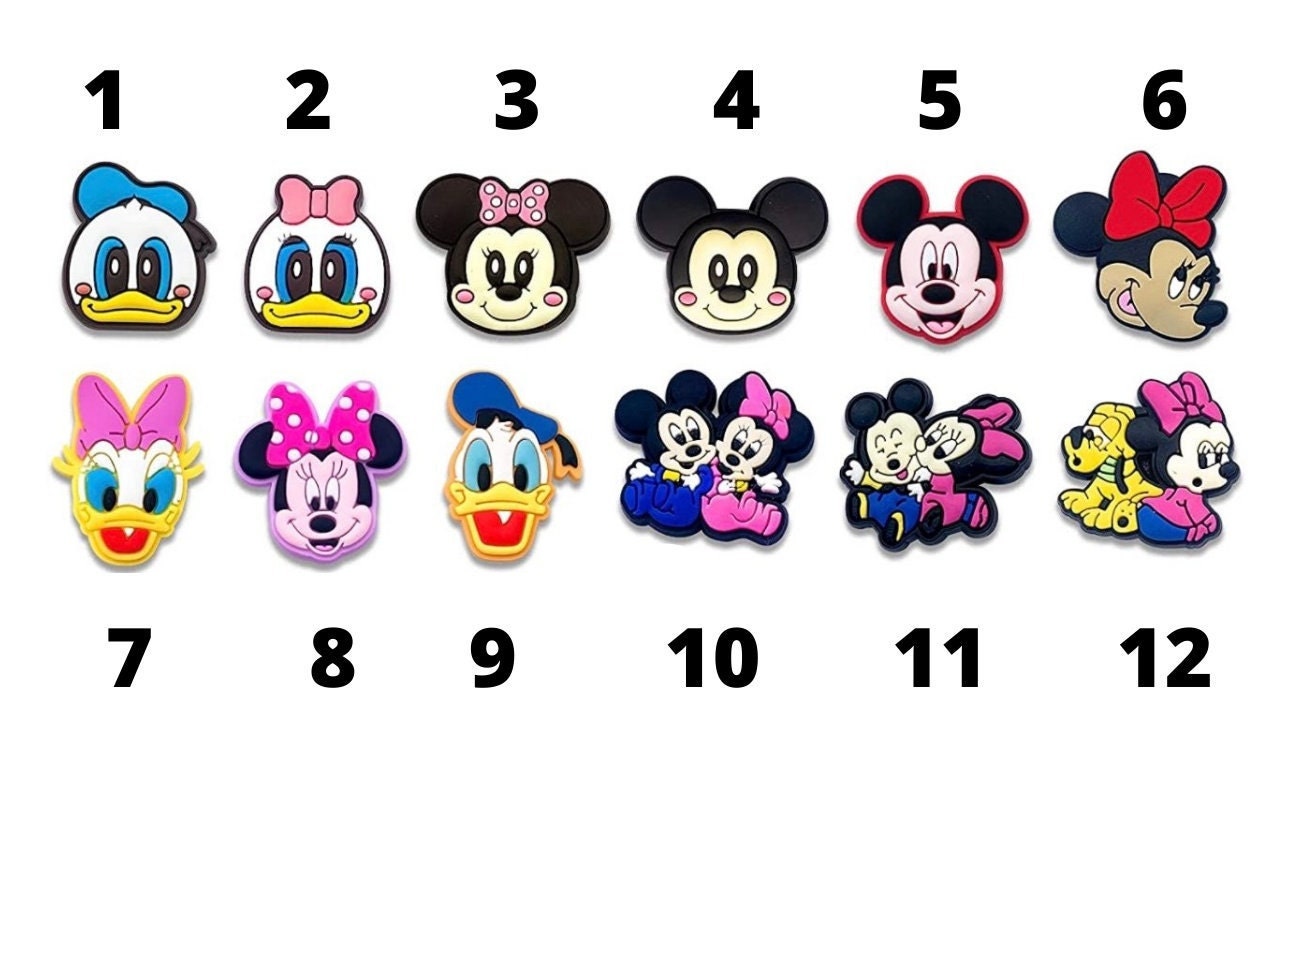 10 SHOE CHARMS for Croc Disney World Characters Mickey Ears Pooh Donald  Goofy $8.99 - PicClick